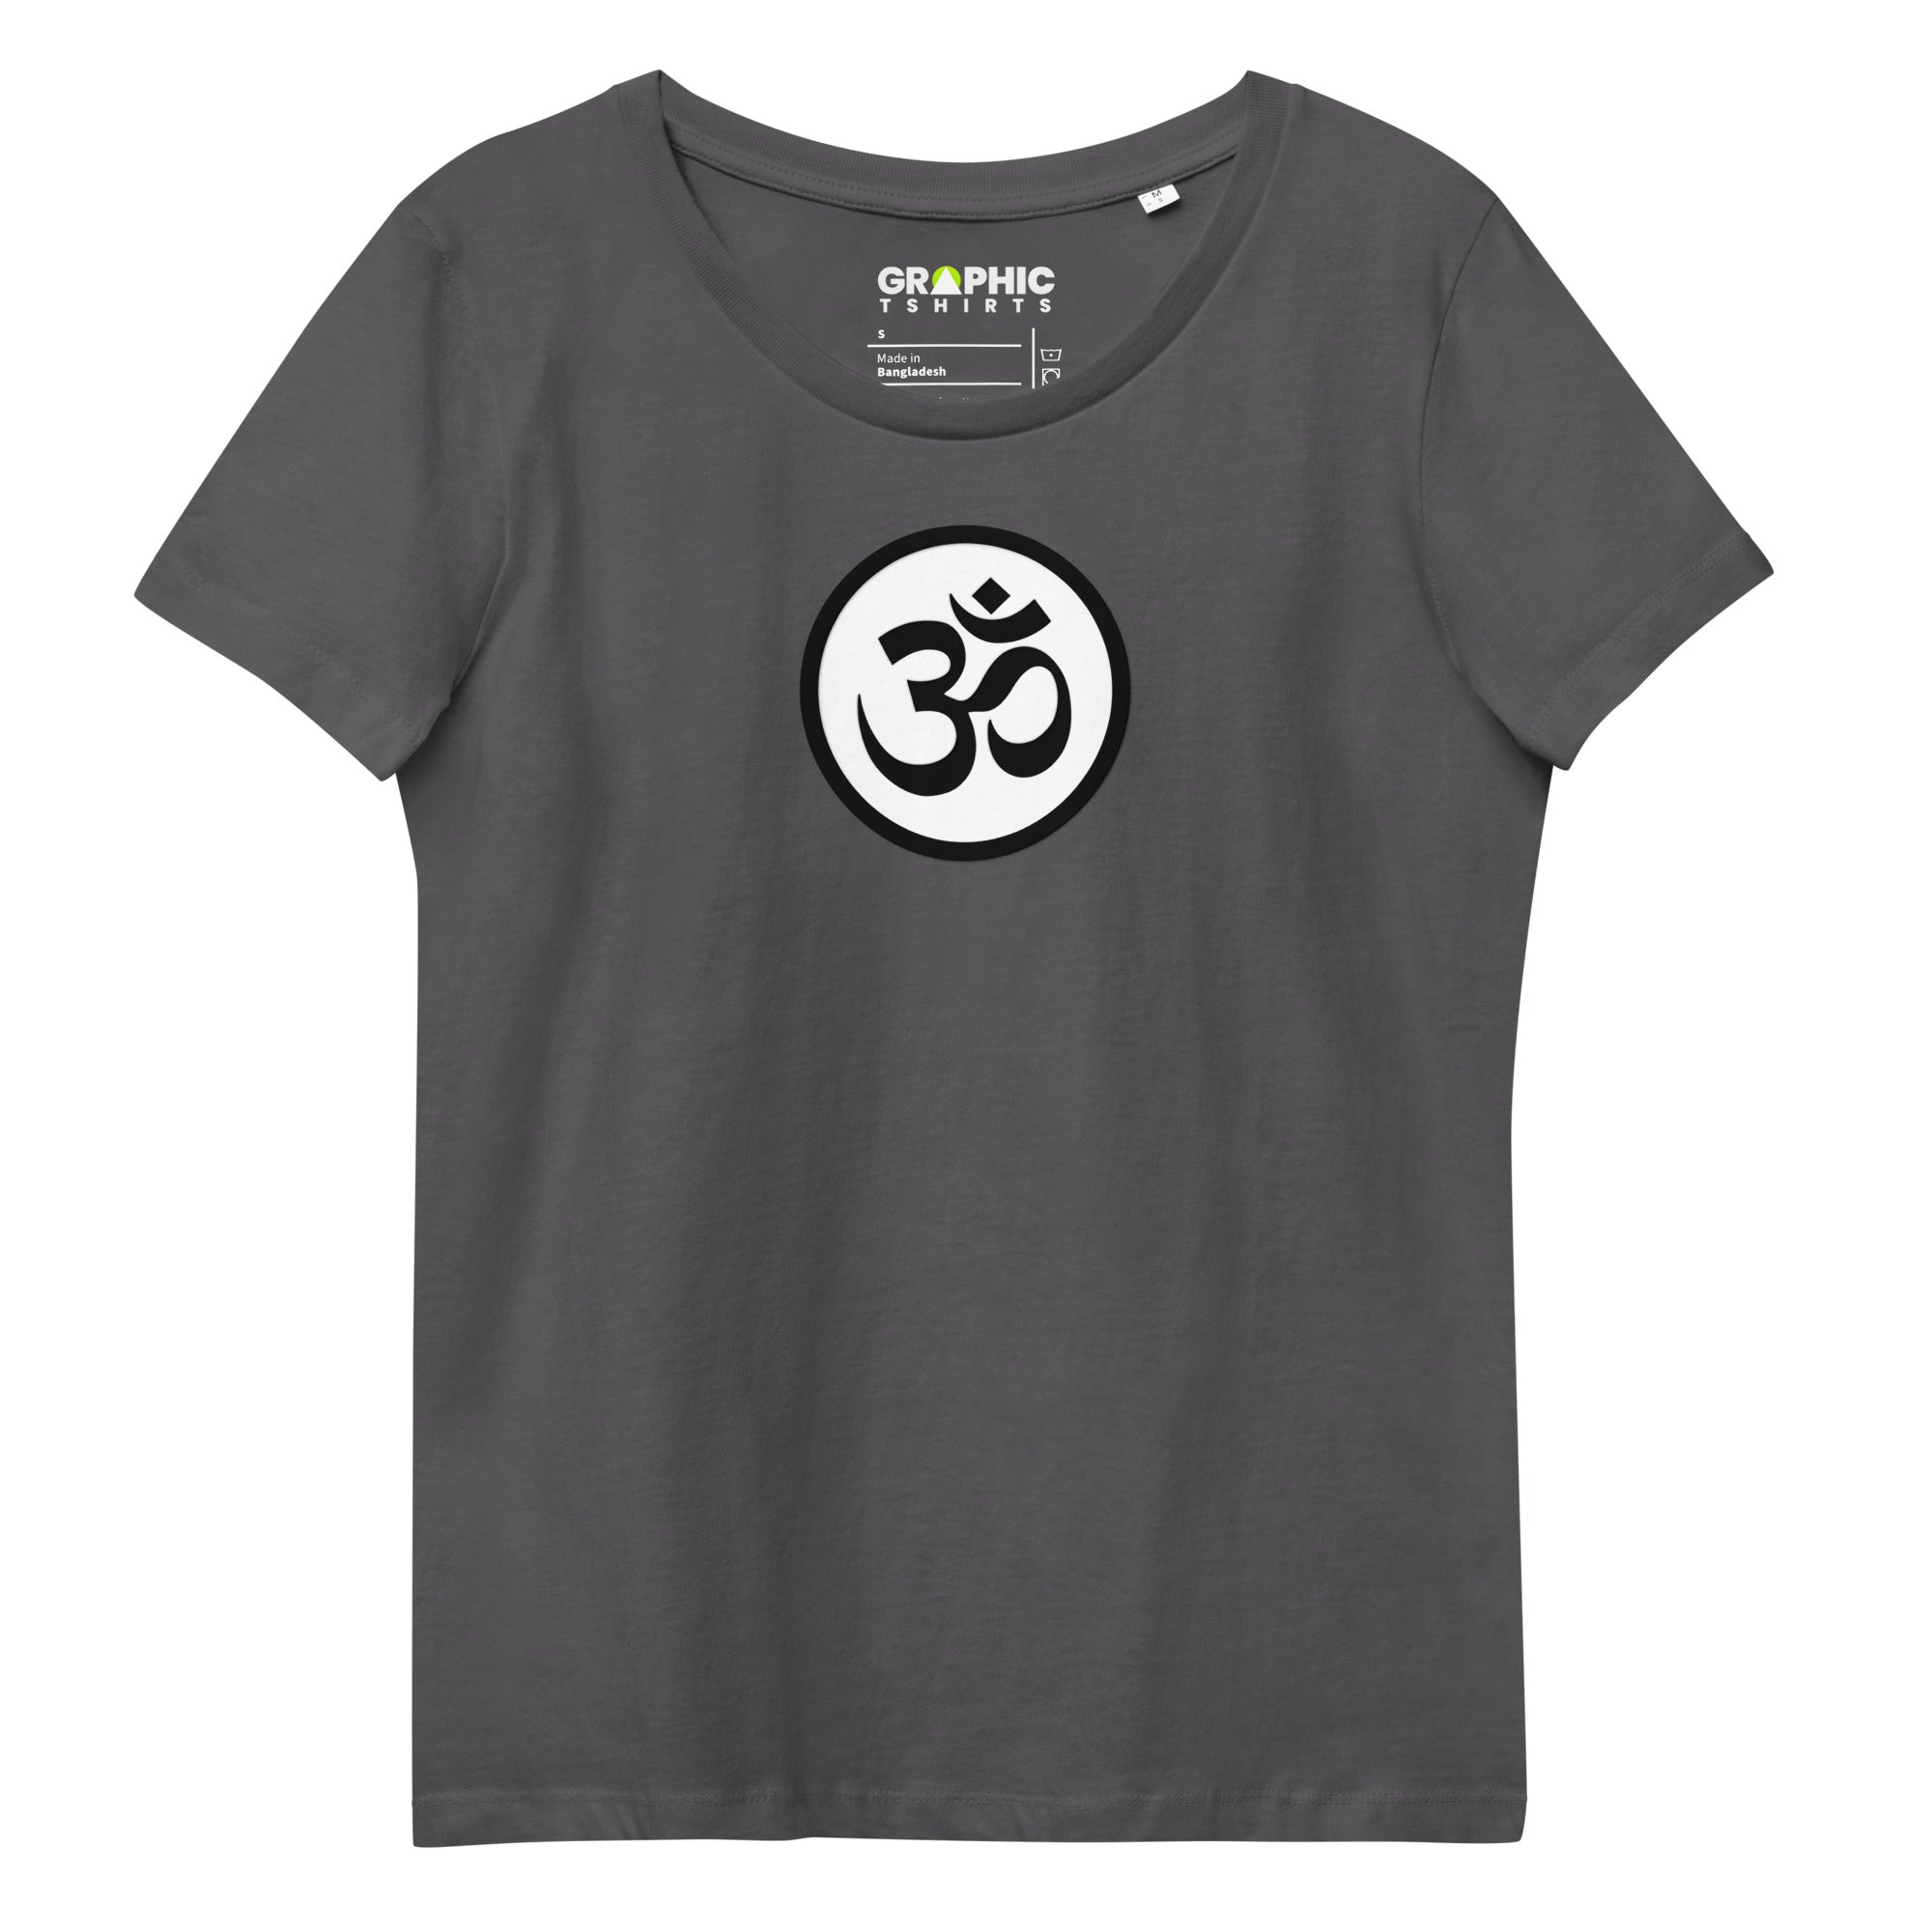 Women's Fitted Eco Tee - Om Namaste Yoga - GRAPHIC T-SHIRTS